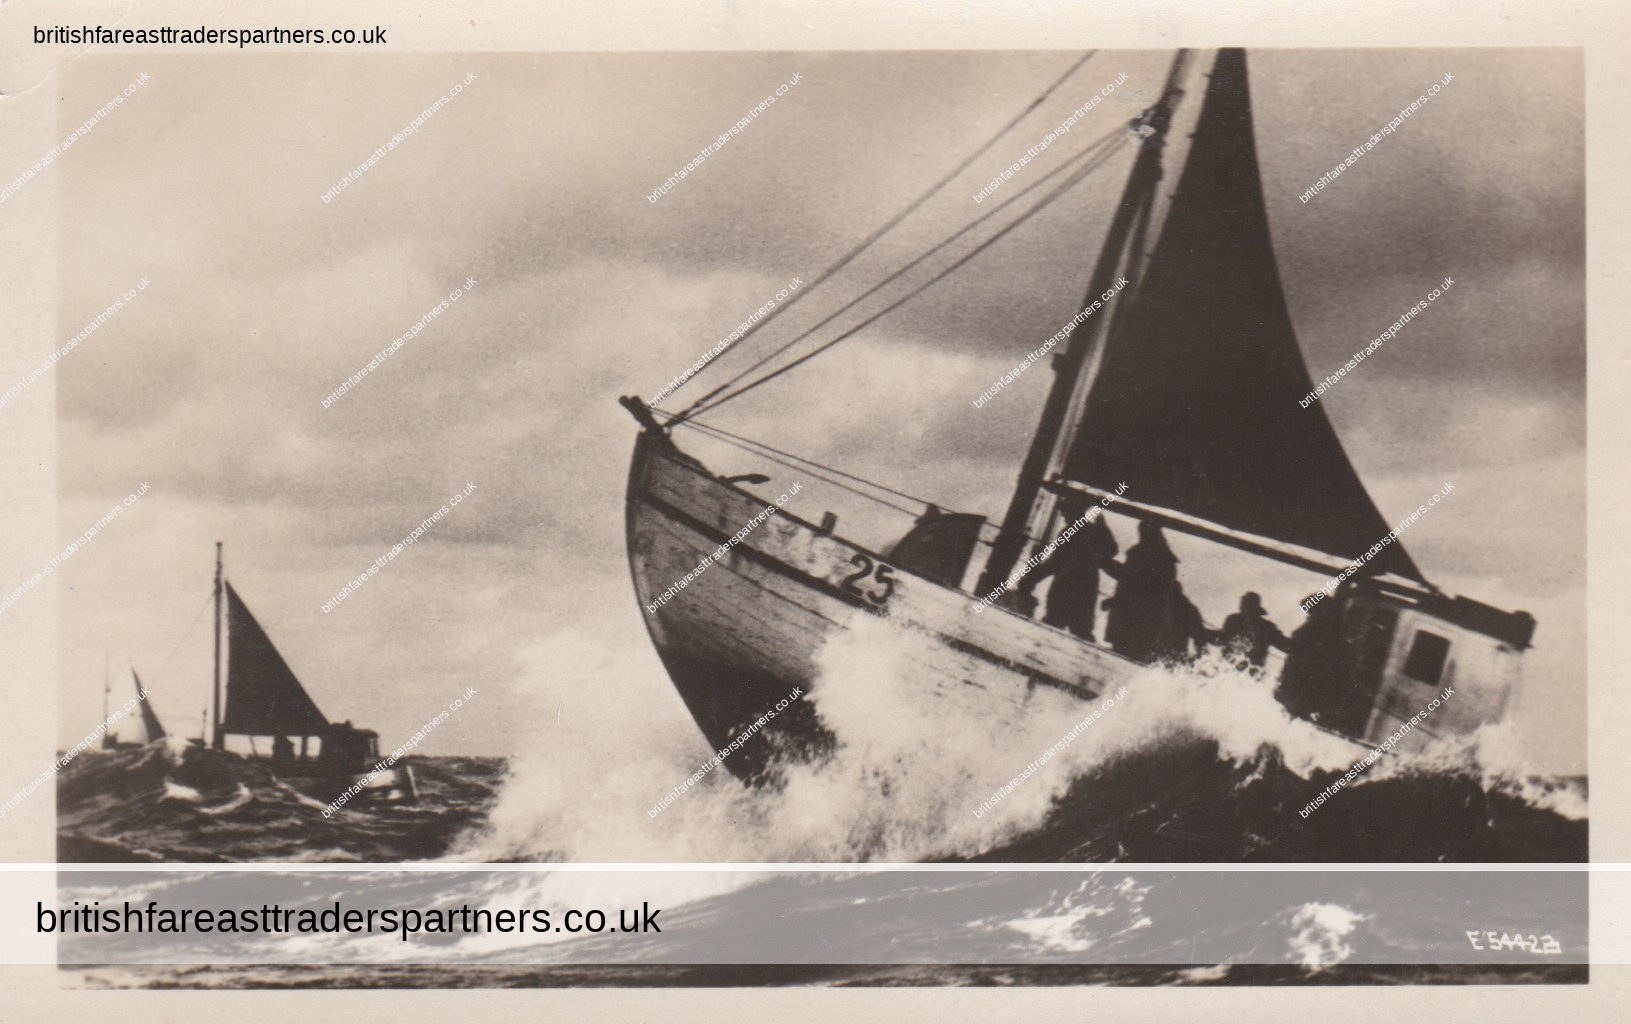 VINTAGE GERMANY PHOTO POSTCARD “Fischkutter im Sturm” COLLECTABLES | VINTAGE | BOATS | SEA | NAUTICAL | HERITAGE